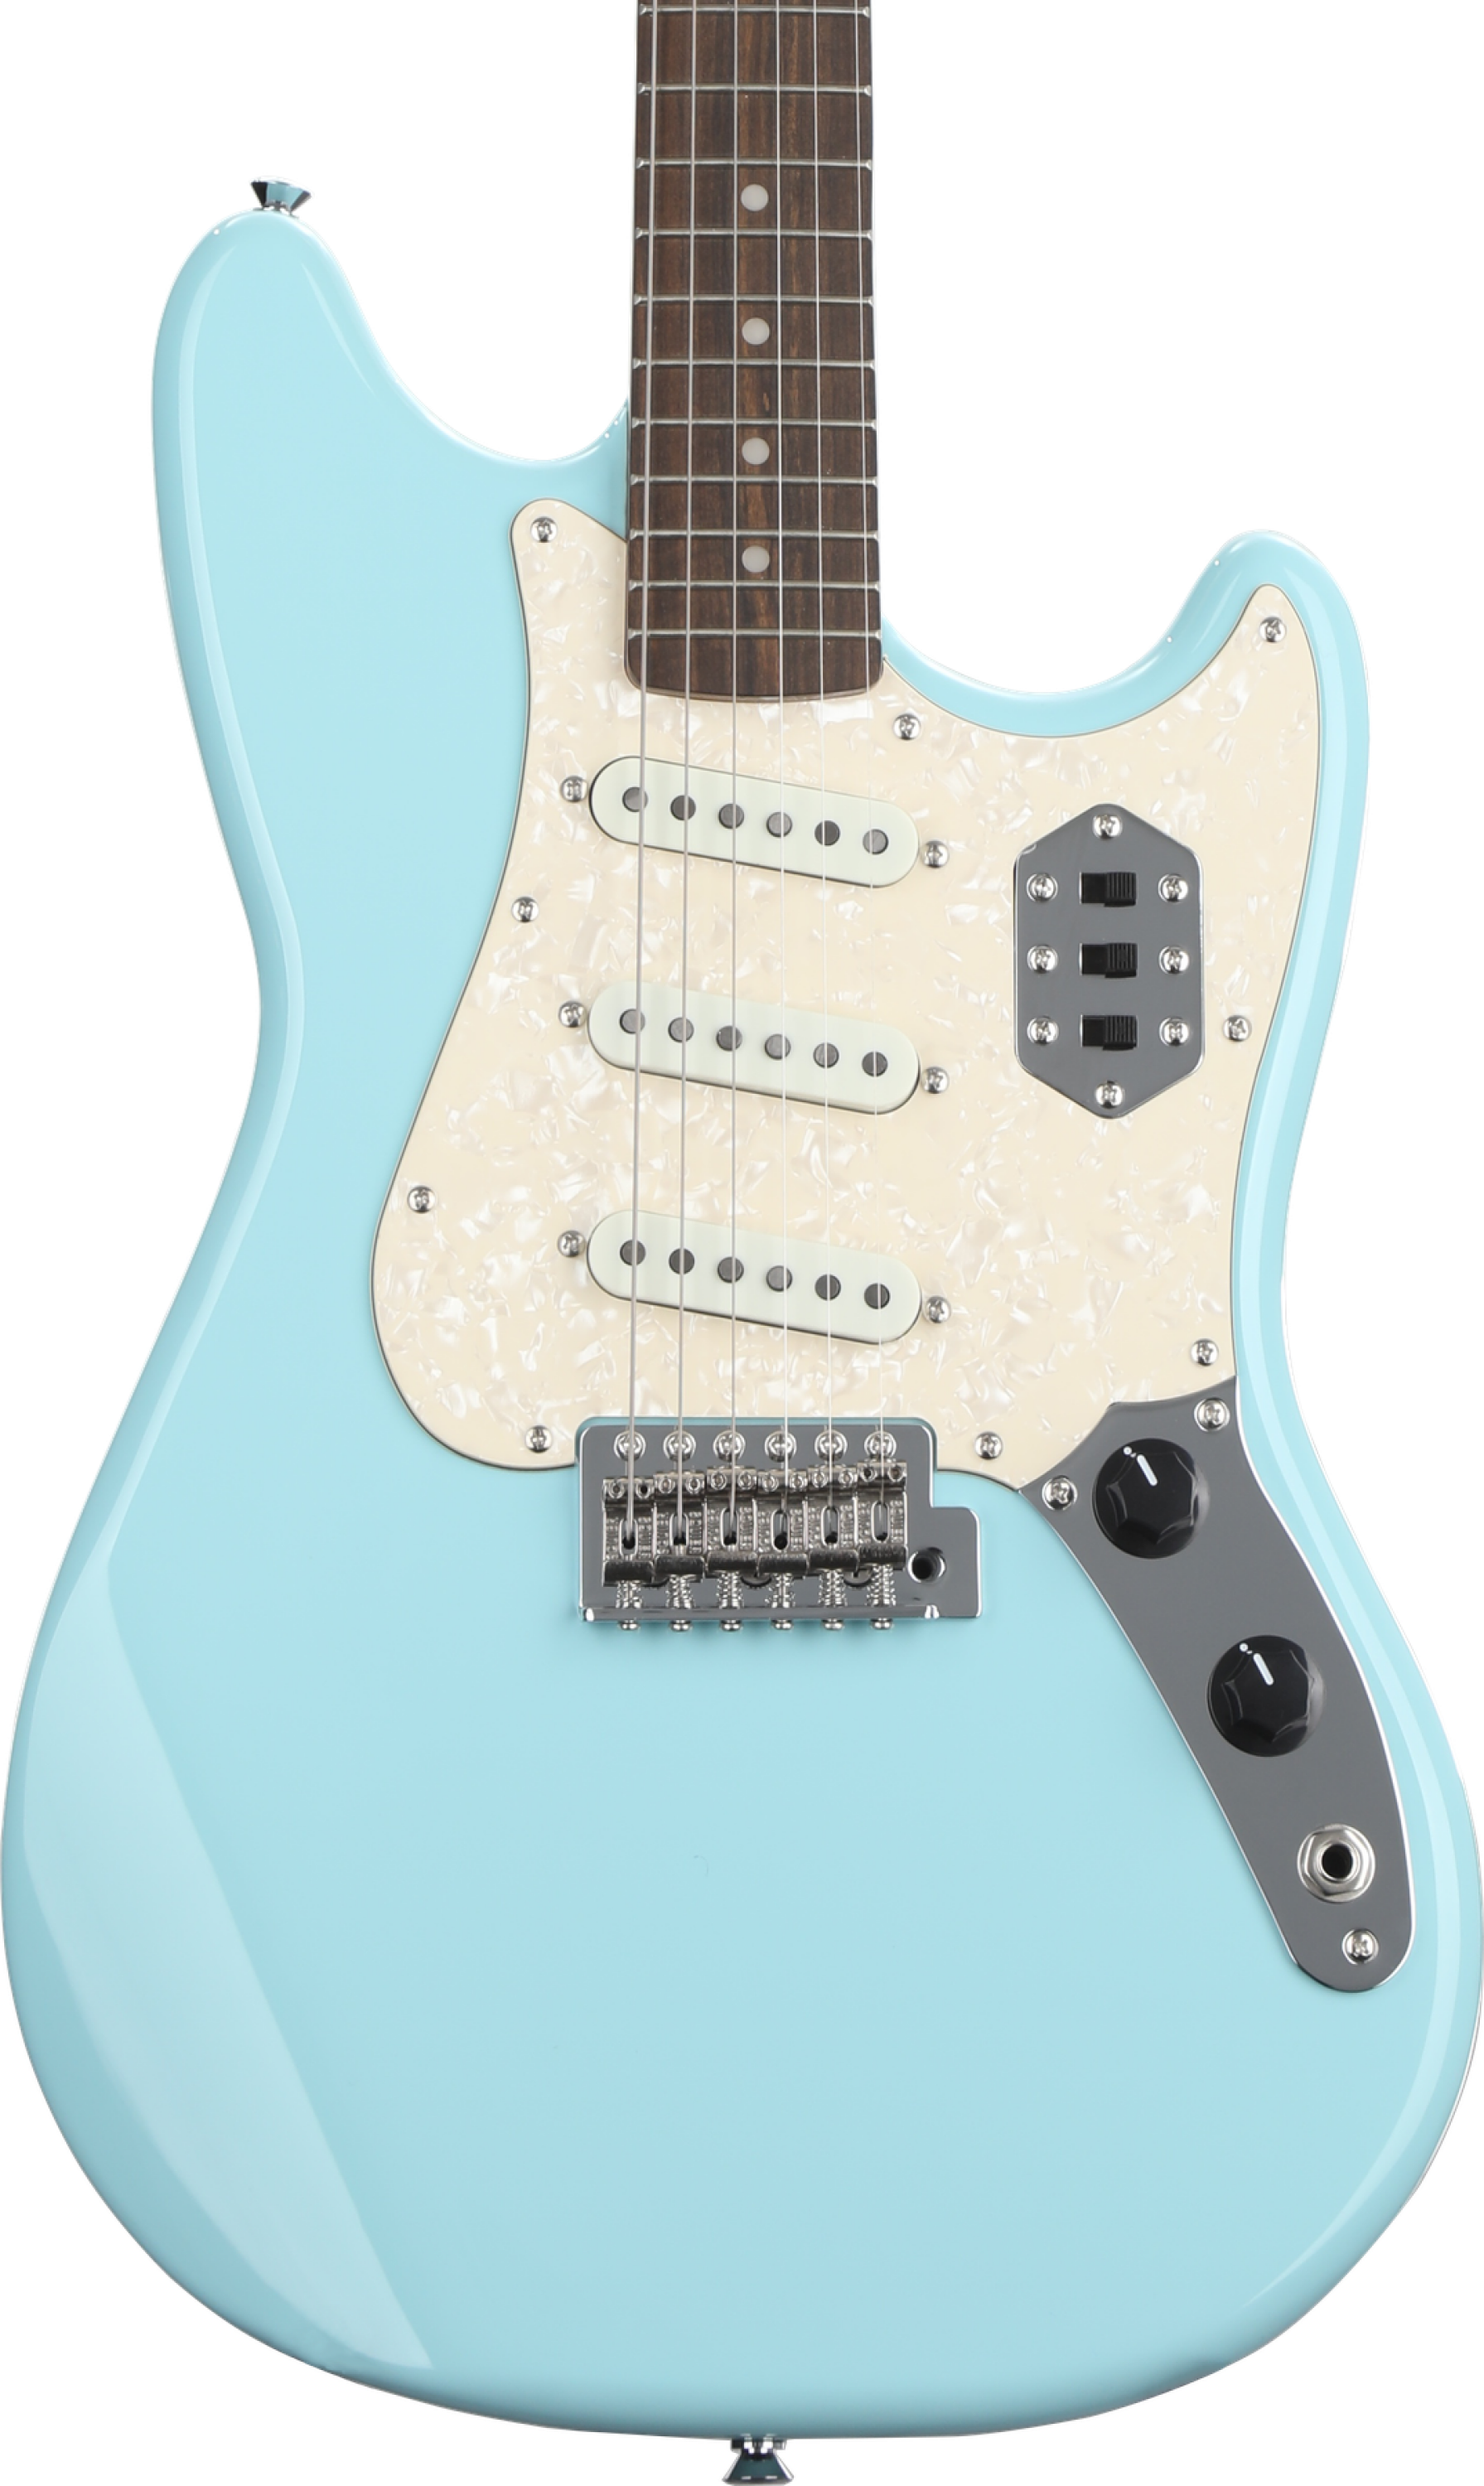 Squier Paranormal Cyclone Electric Guitar - Daphne Blue | Sweetwater